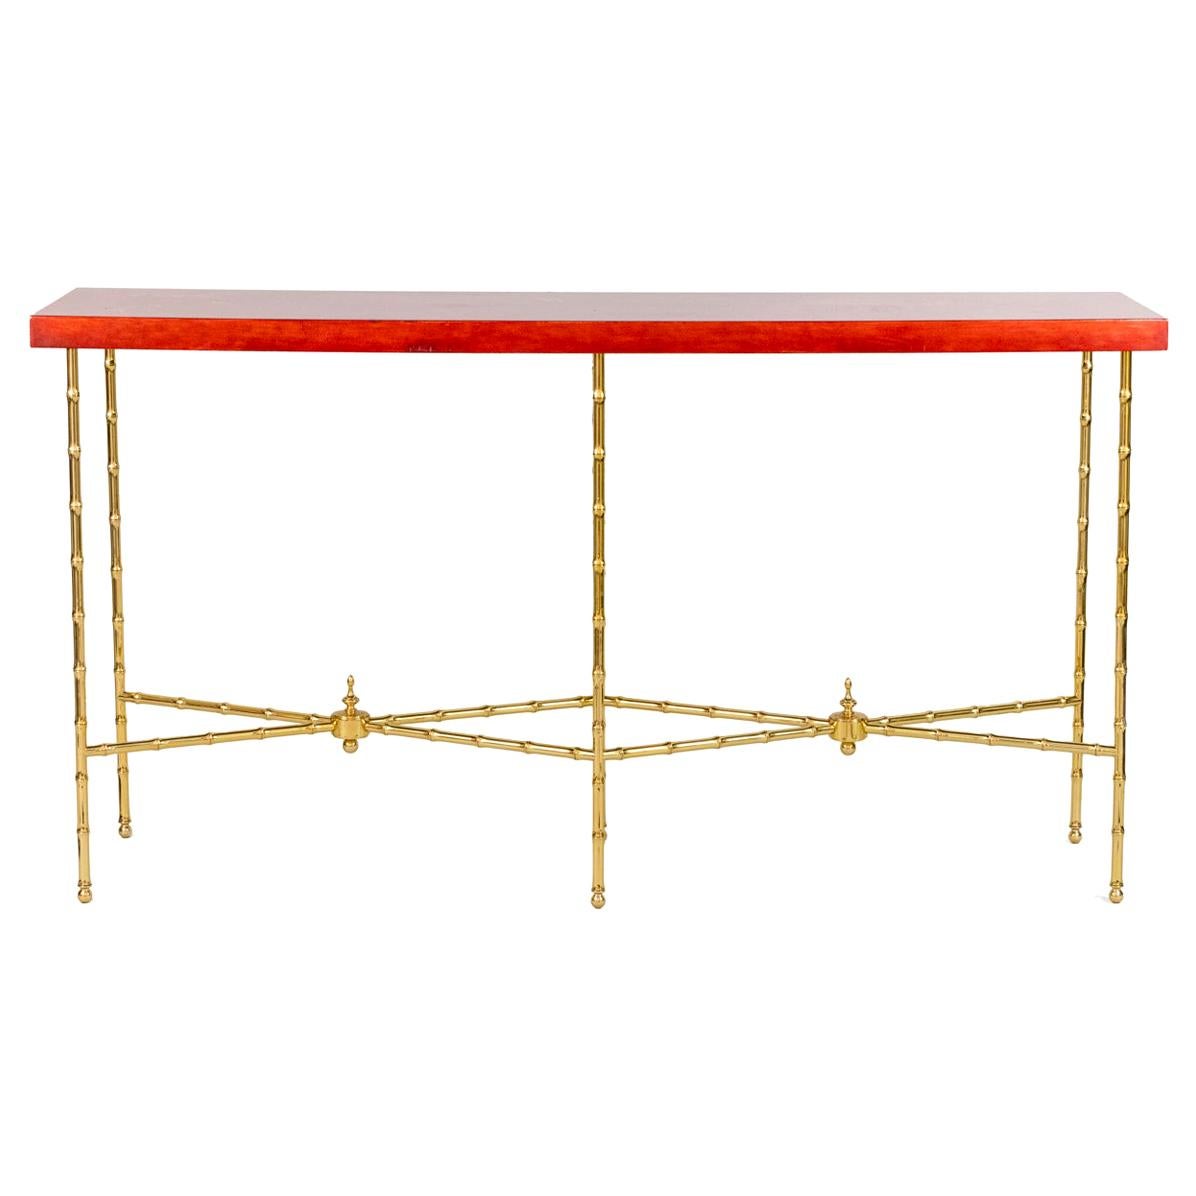 Bernard Dunand, Console in Lacquer and Gilt Bronze, 1950s